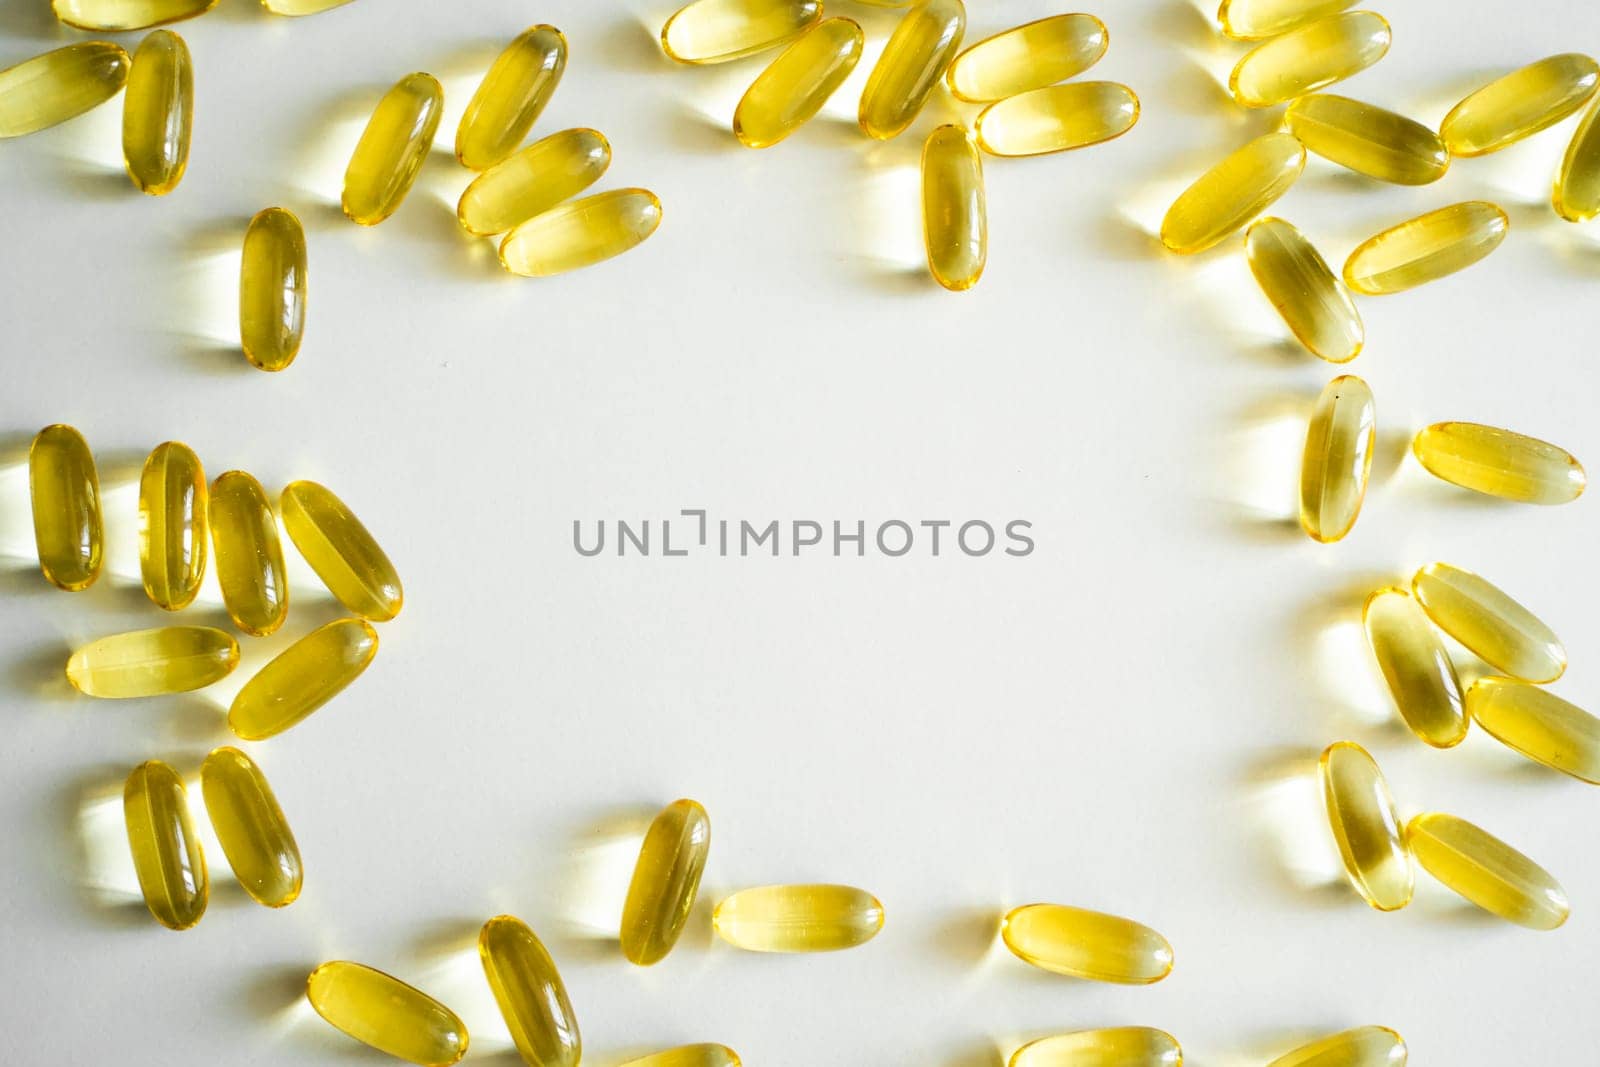 Close up of capsules Omega 3. Health care concept. Medical pill or vitamin's capsule pattern. Medicine, healthcare or pharmacy concept